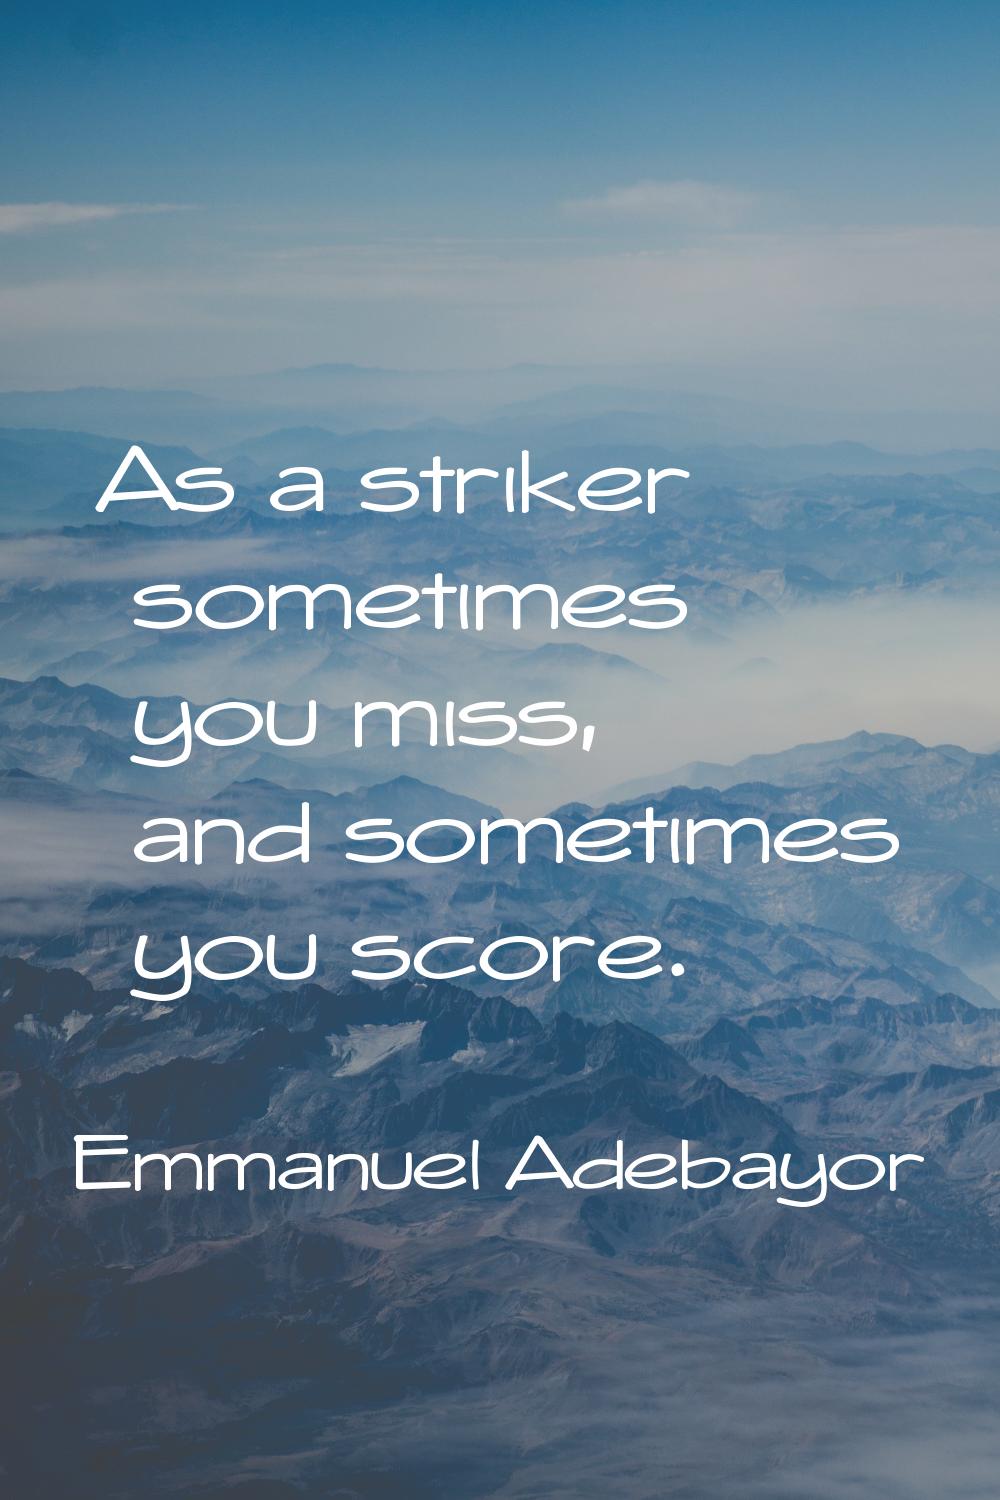 As a striker sometimes you miss, and sometimes you score.